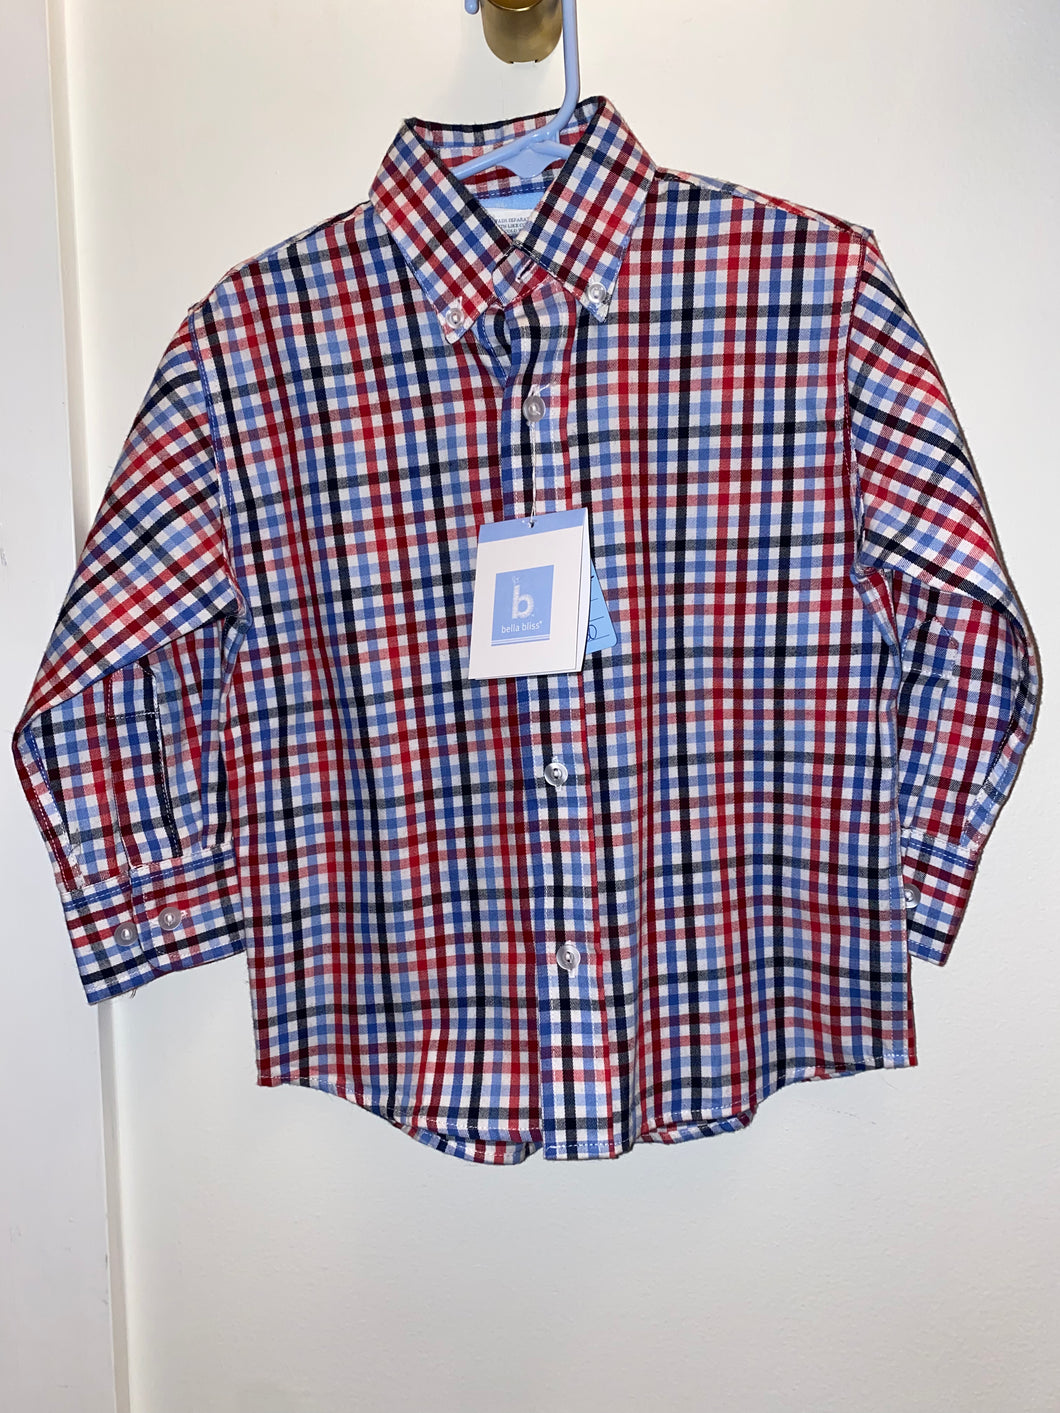 NWT Bella Bliss size 3 button up